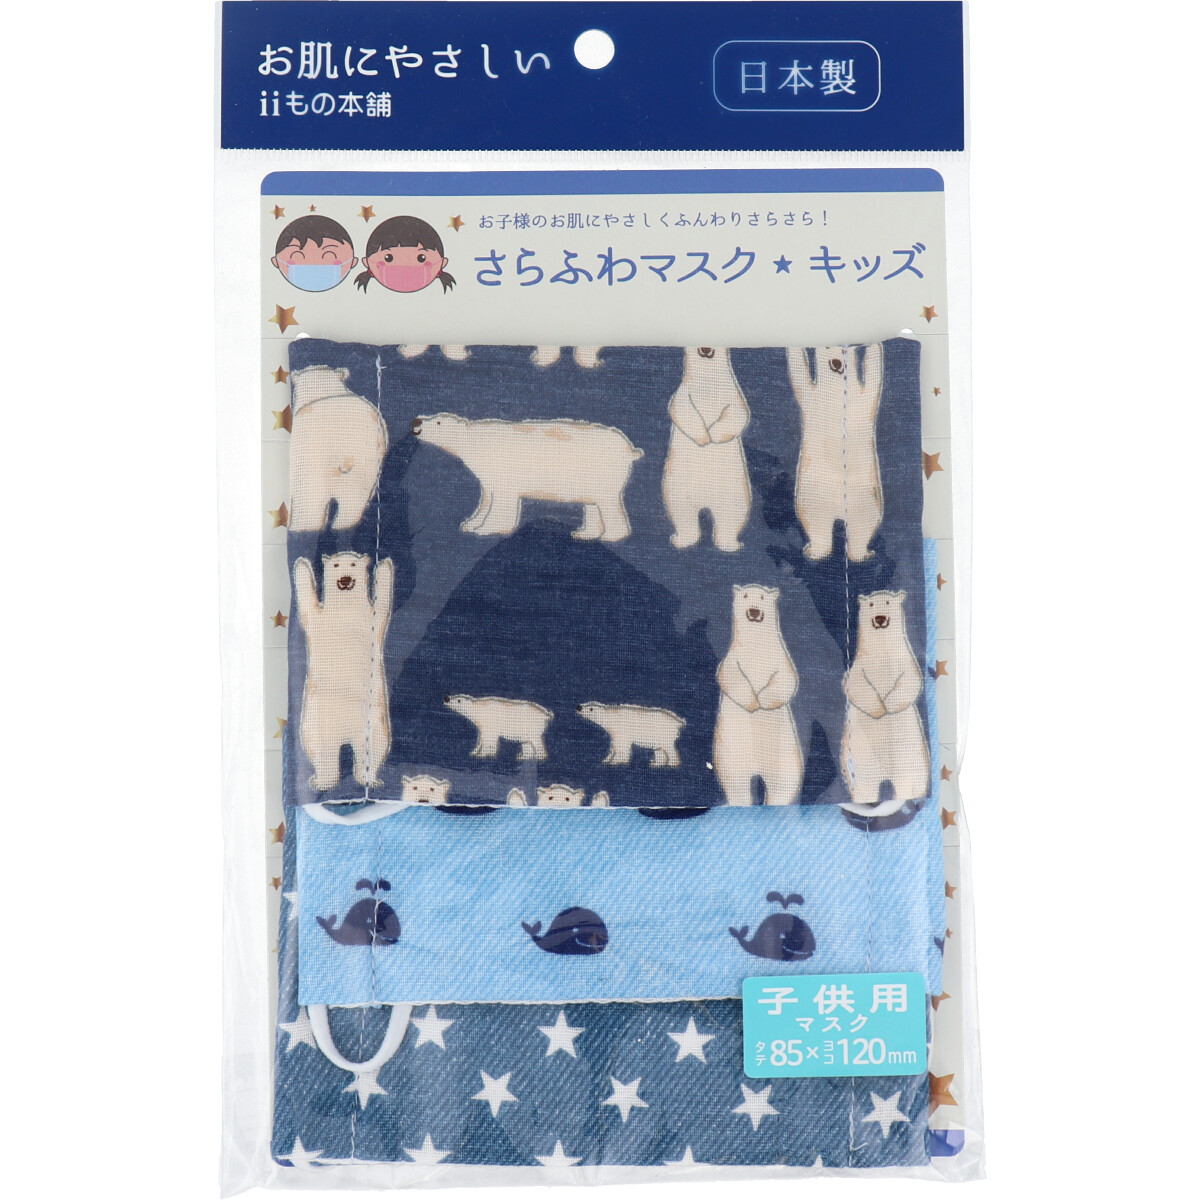 Picture of Denim series Smooth and Fluffy Kids' Mask 3 pieces